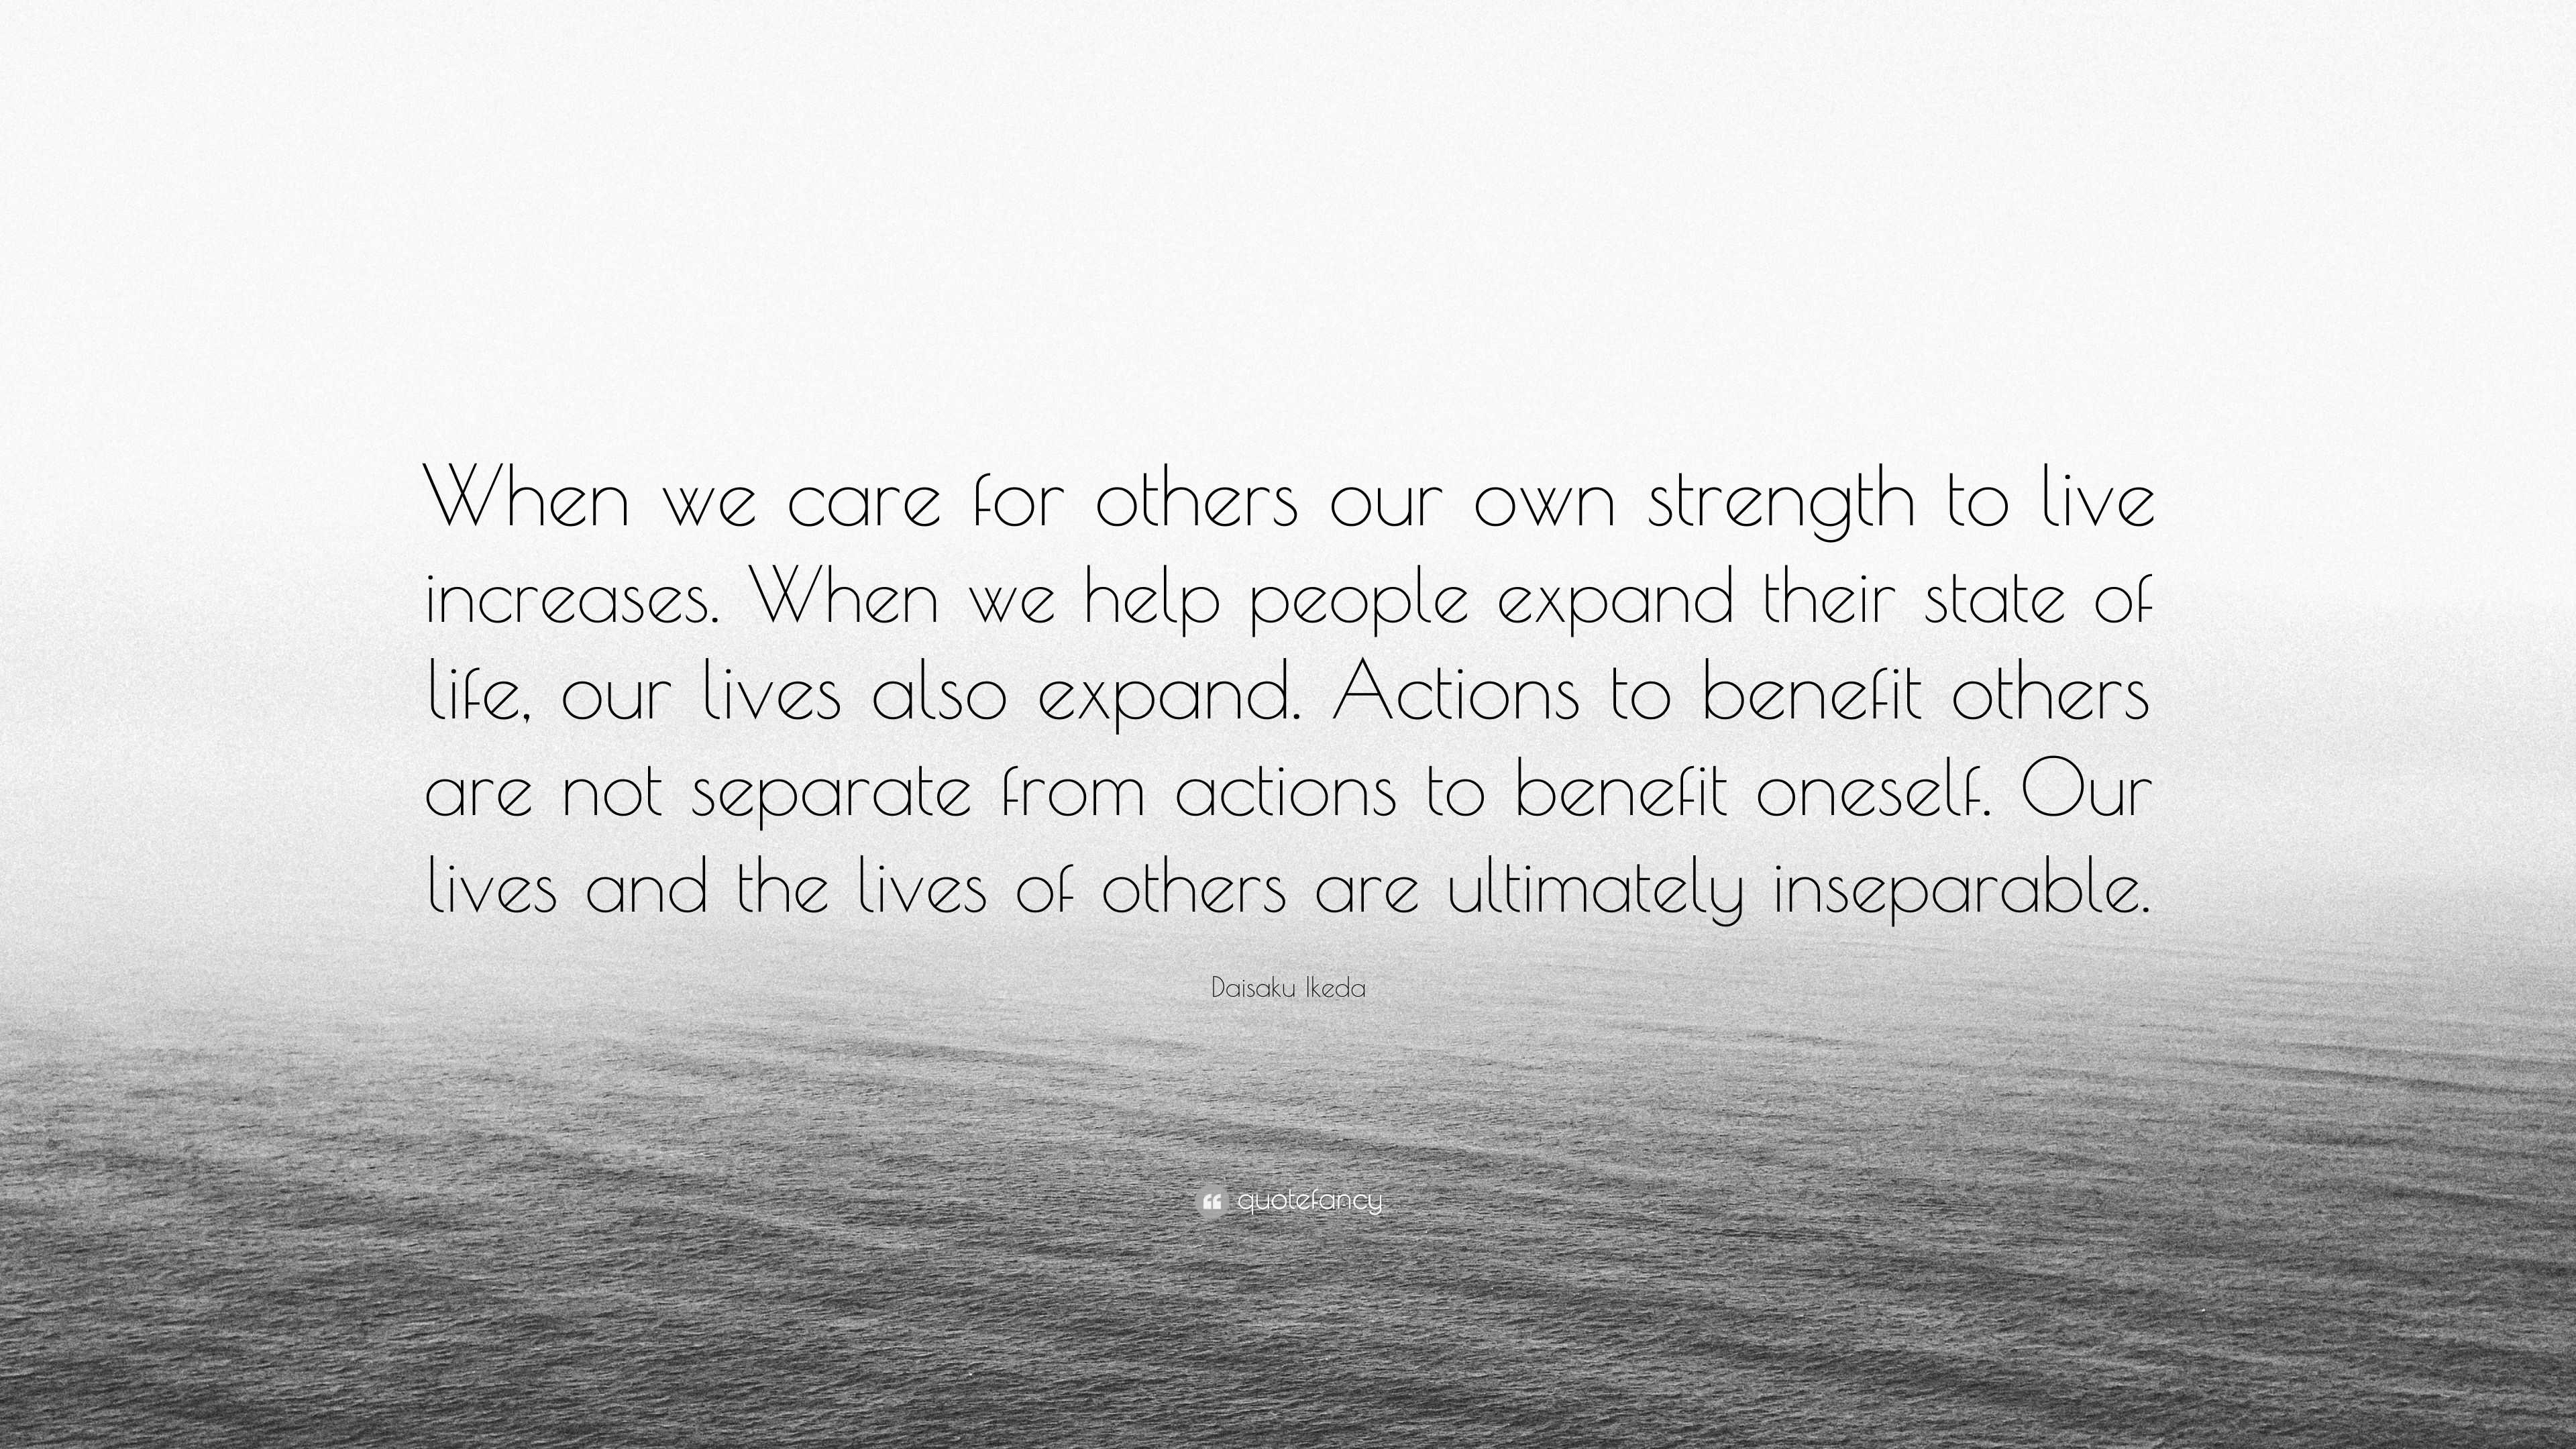 Daisaku Ikeda Quote “When we care for others our own strength to live increases